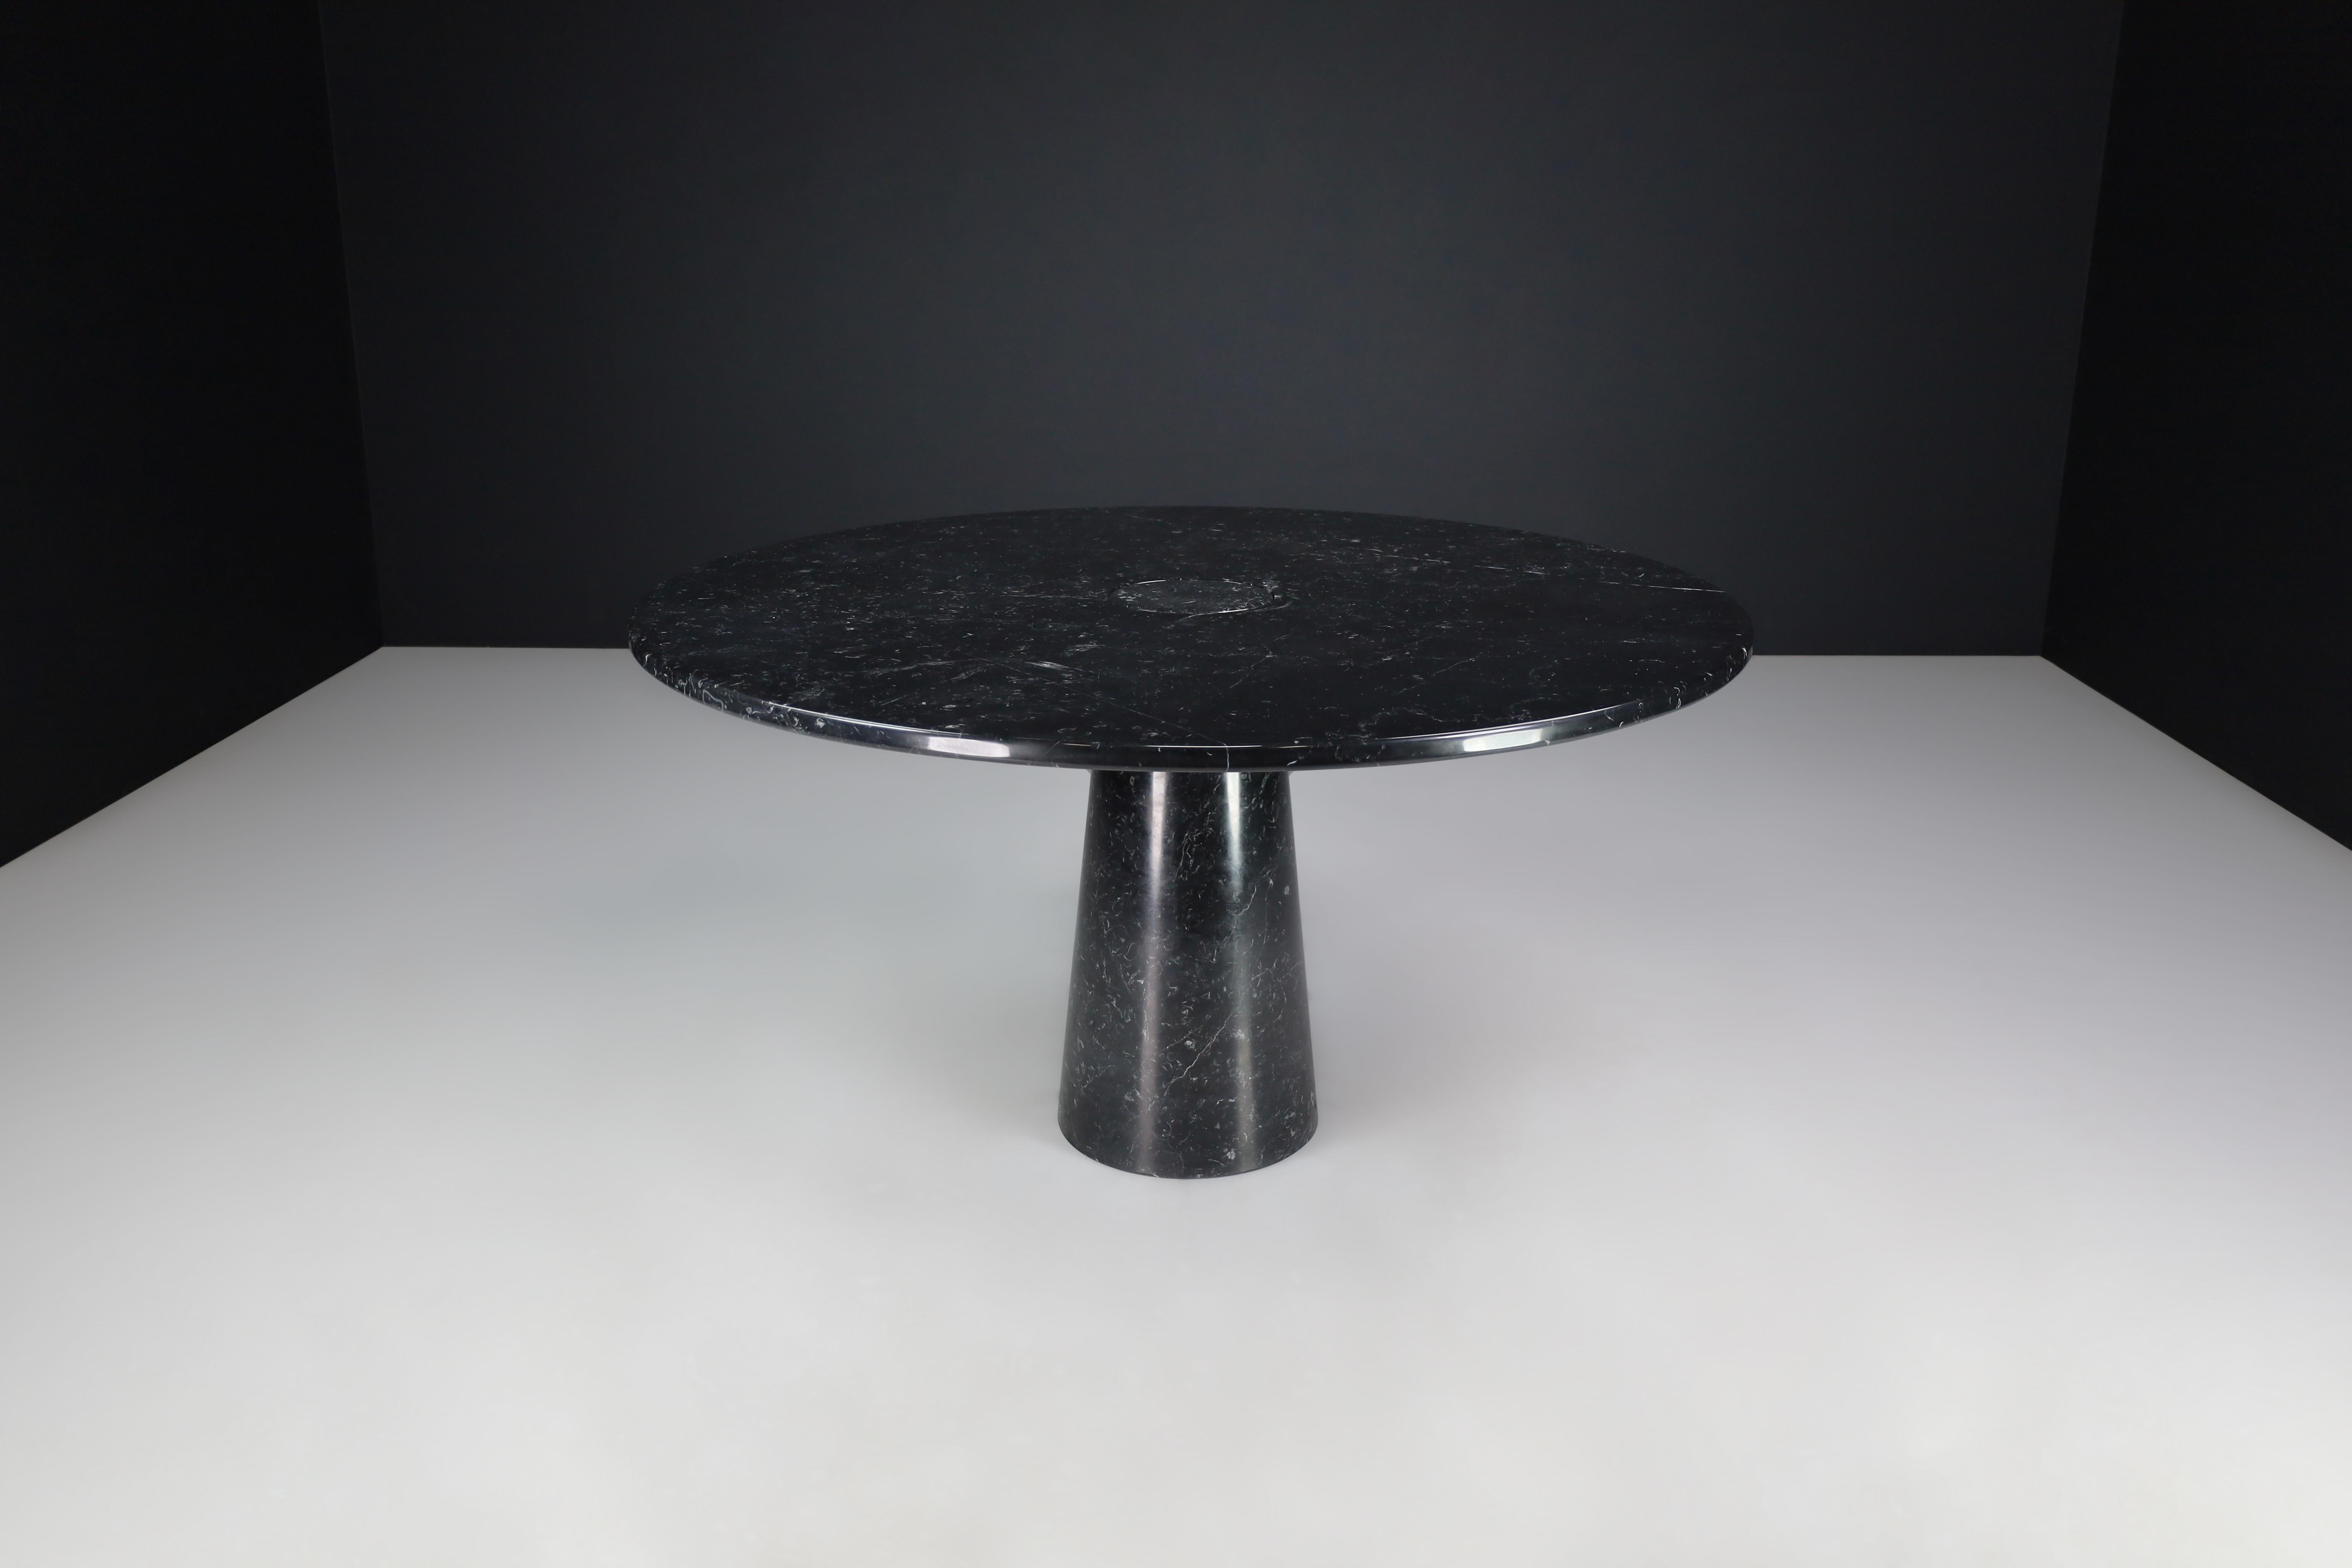 Angelo Mangiarotti for Skipper 'Eros' round dining table in Marquina Marble, Italy, 1970s.

This is the Skipper 'Eros' series round dining table designed by Angelo Mangiarotti in the 1970s. The table is made of black Nero Marquina marble and has a